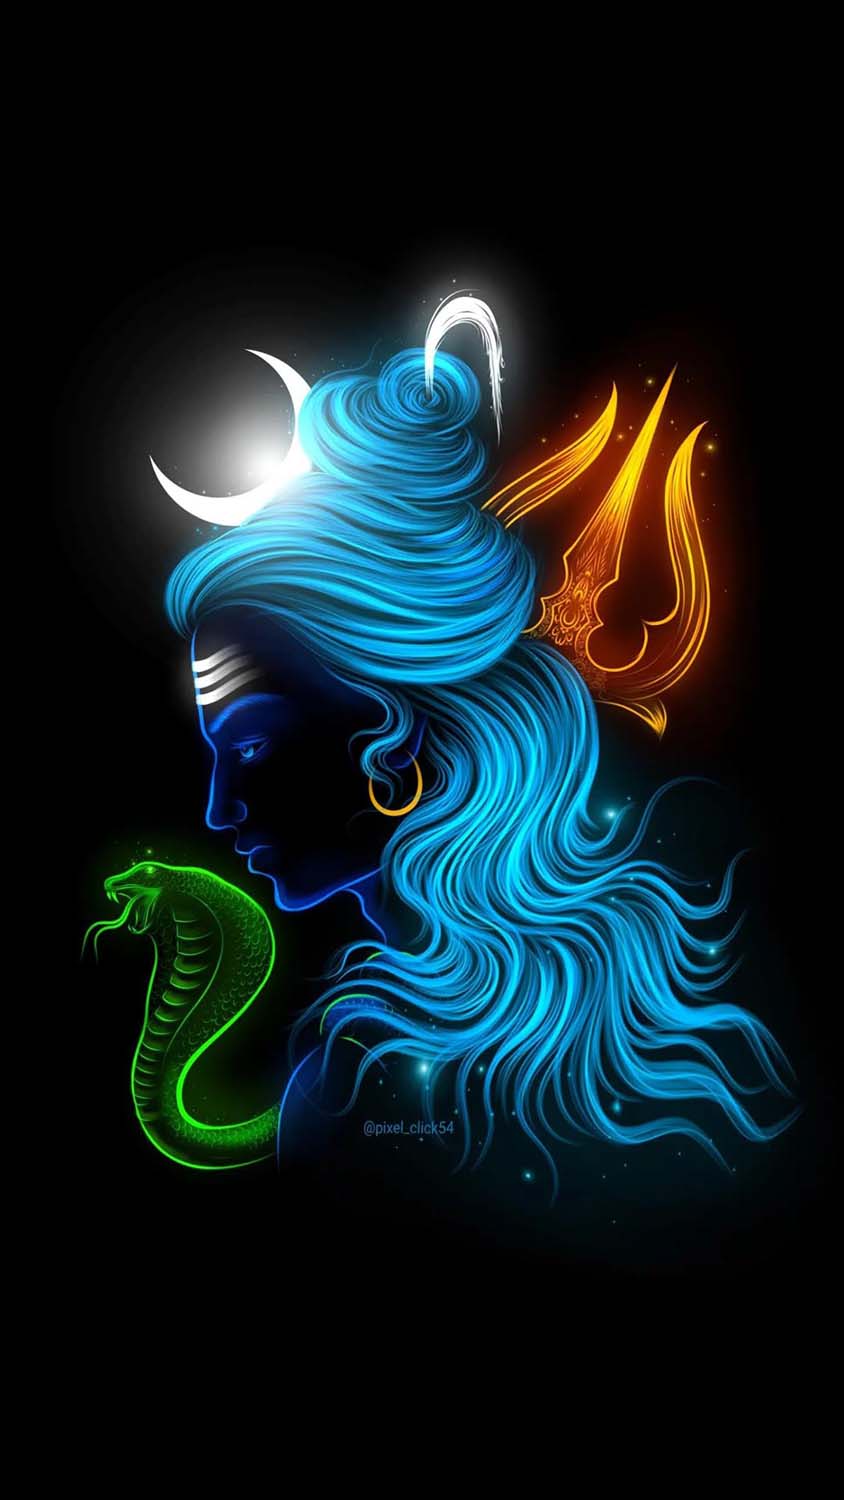 Shiva Space iPhone Wallpaper HD - iPhone Wallpapers